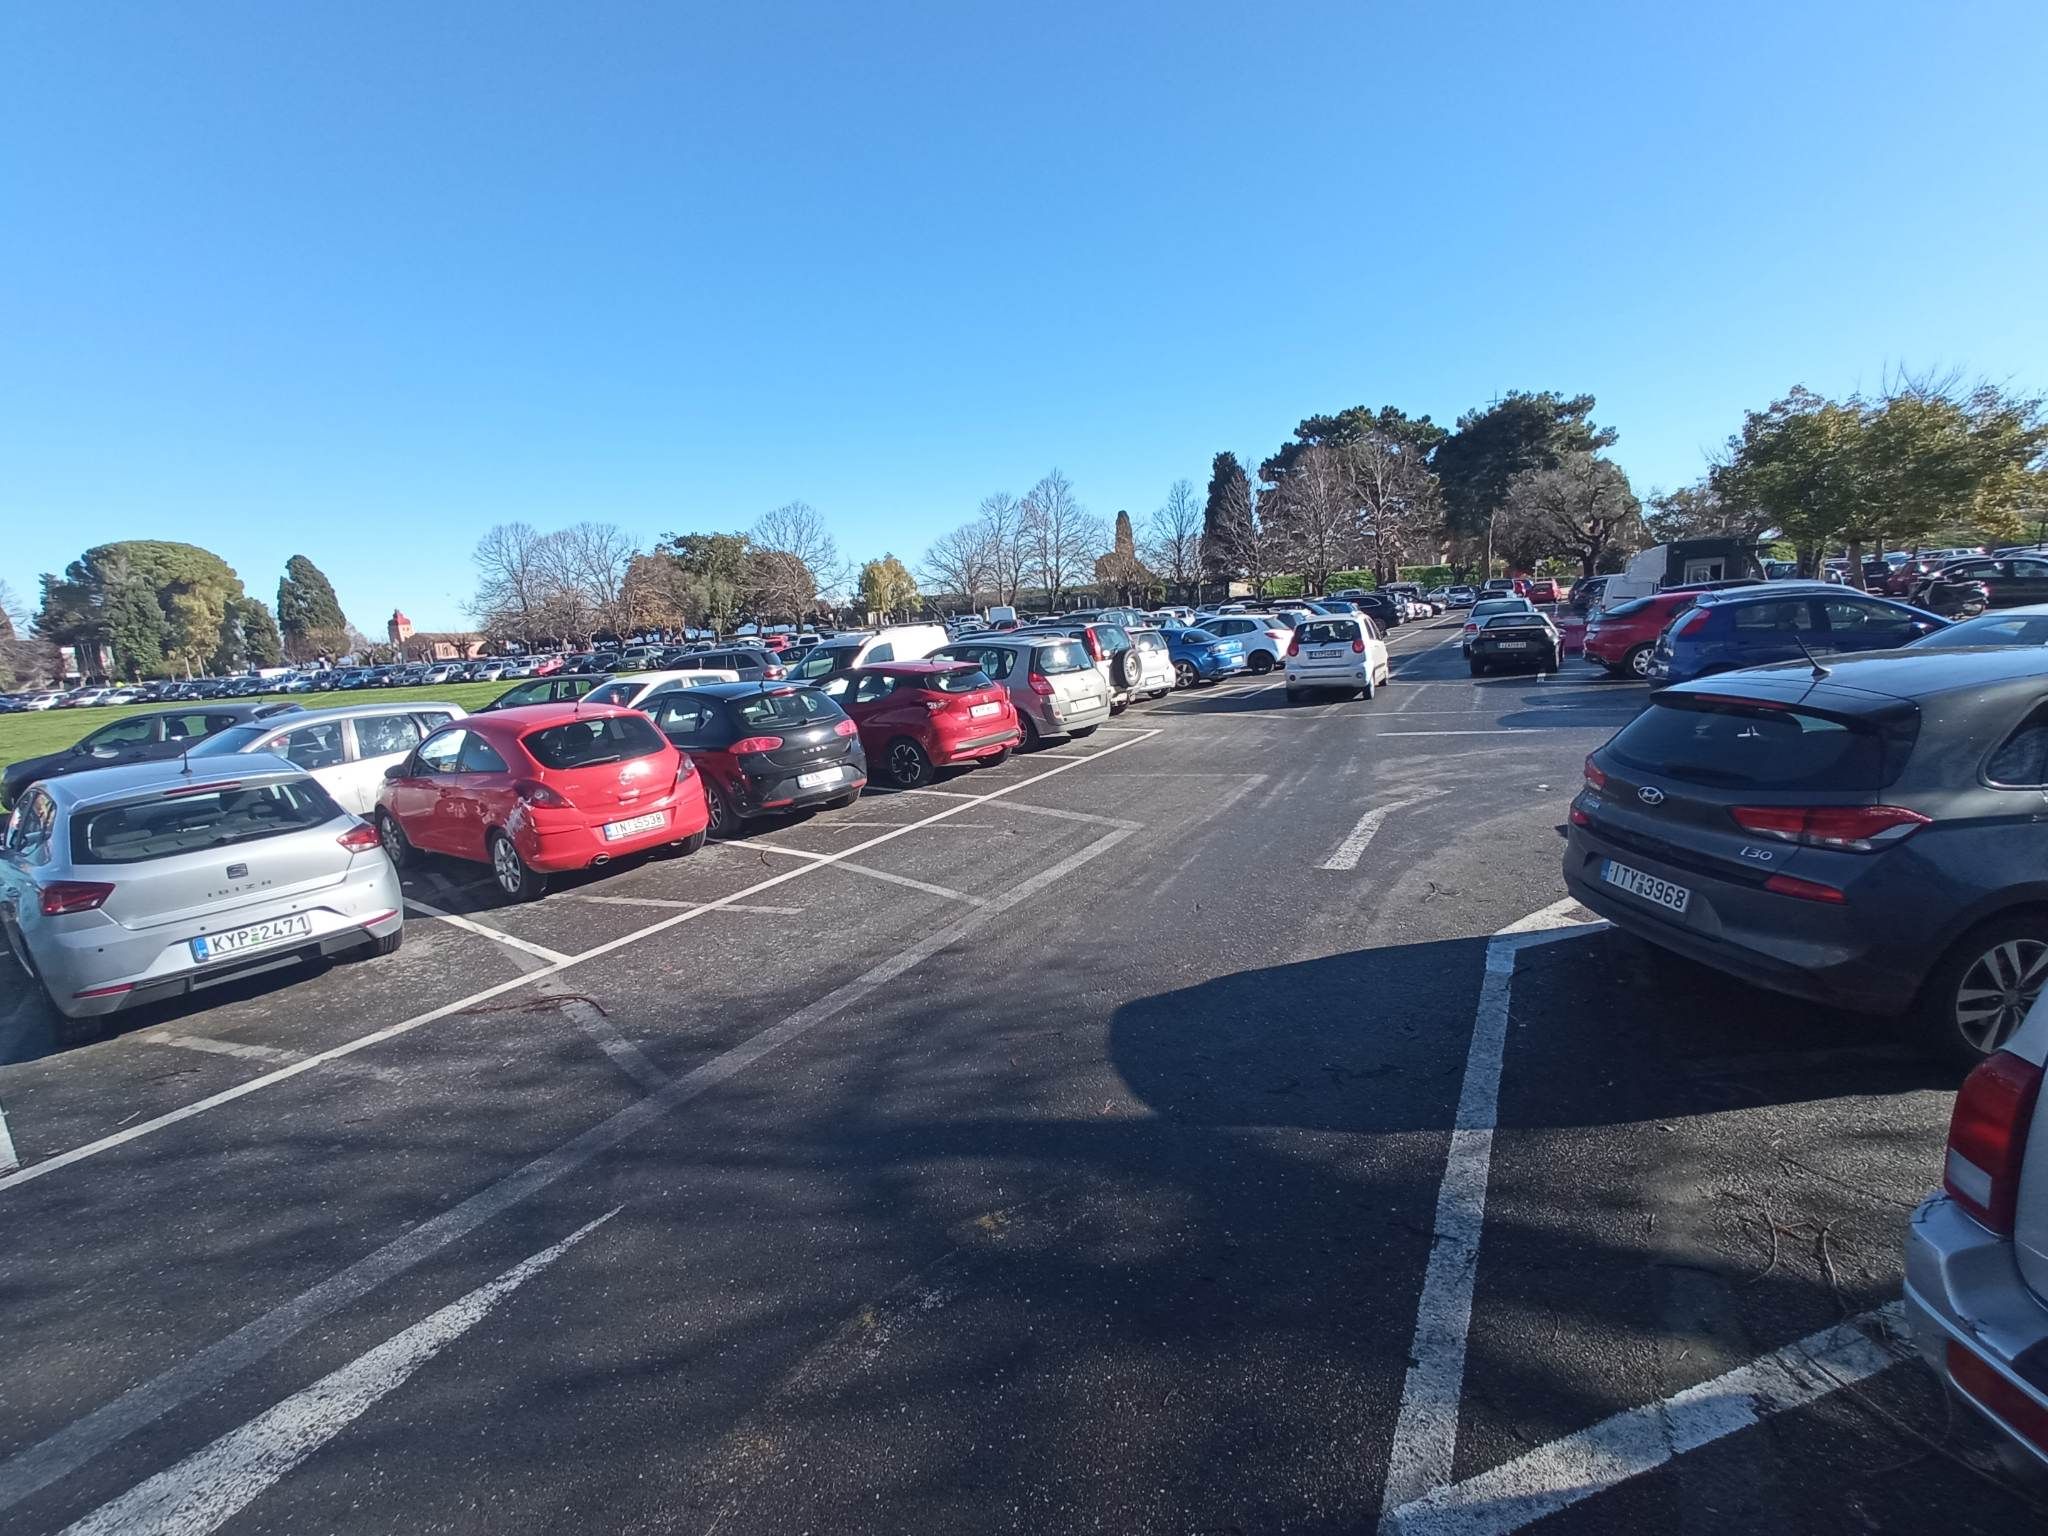 Regional Authority to seal off Lower Square car park - Municipality fined